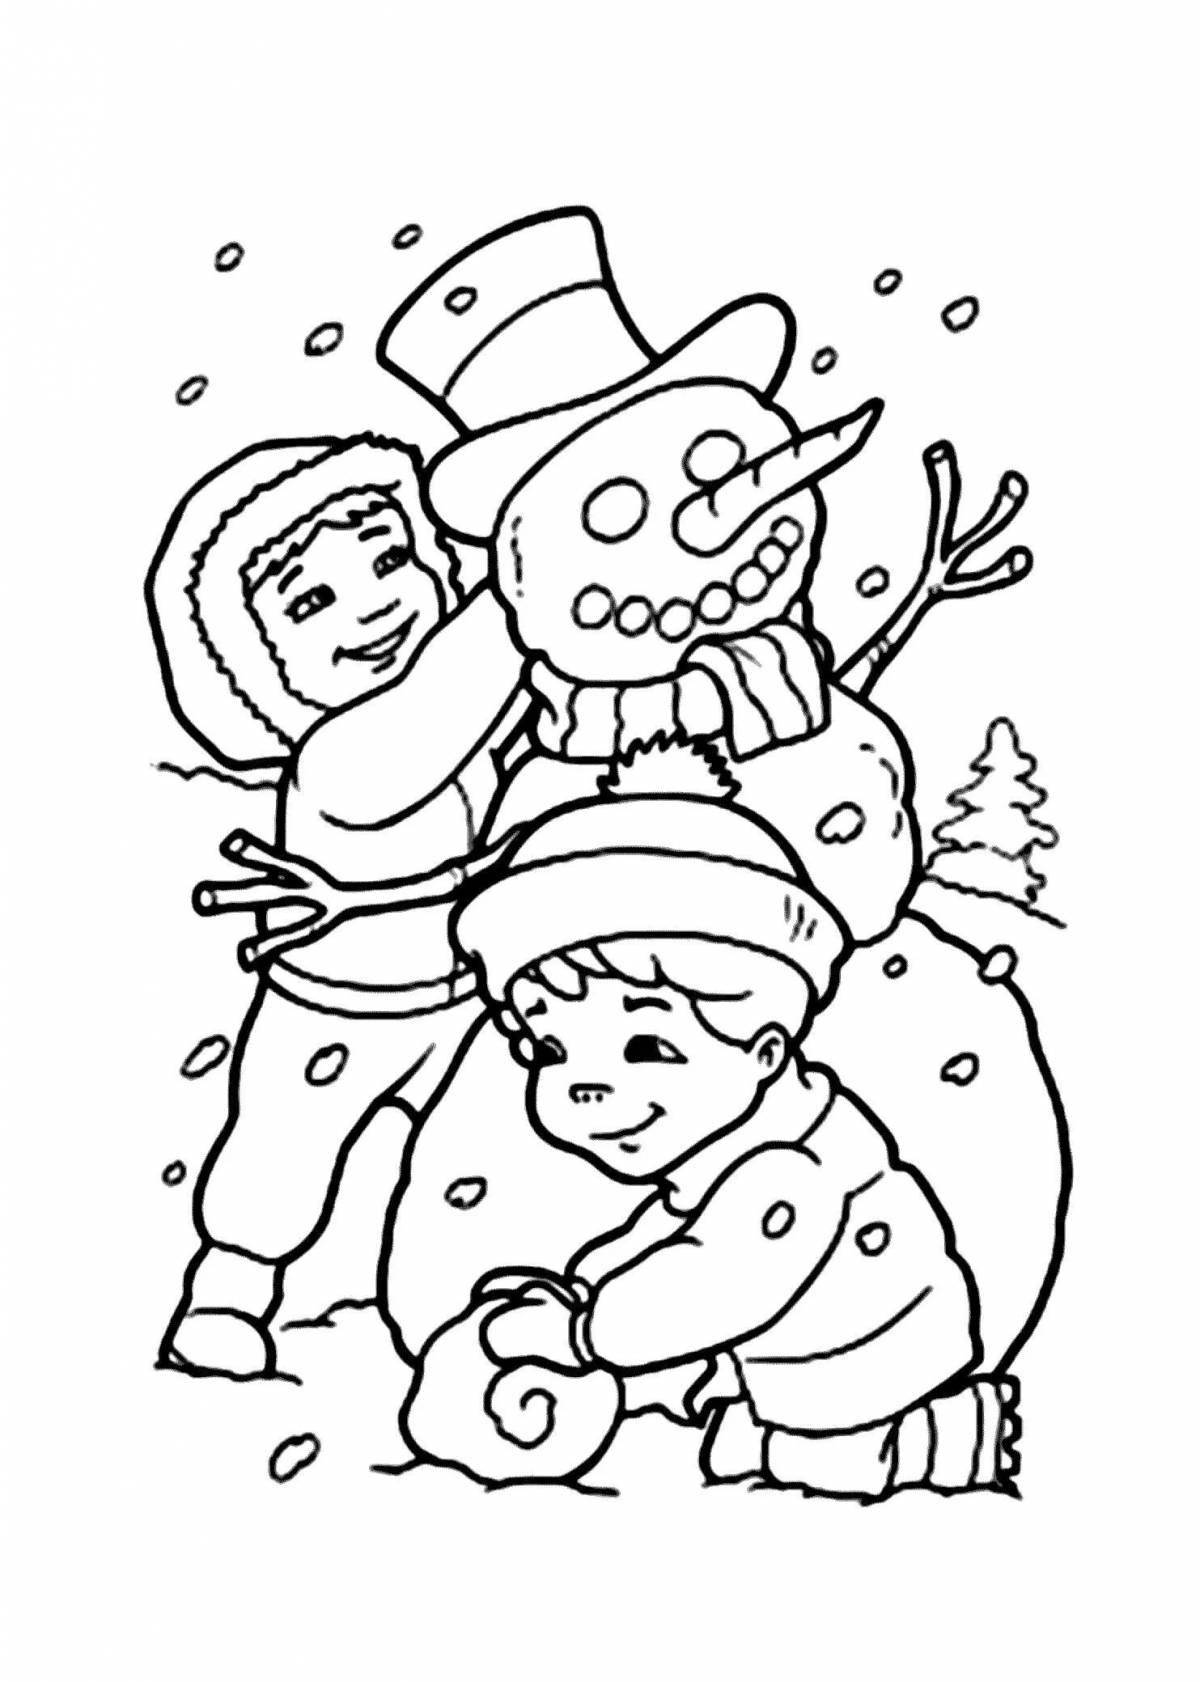 Fun coloring pages for kids in winter